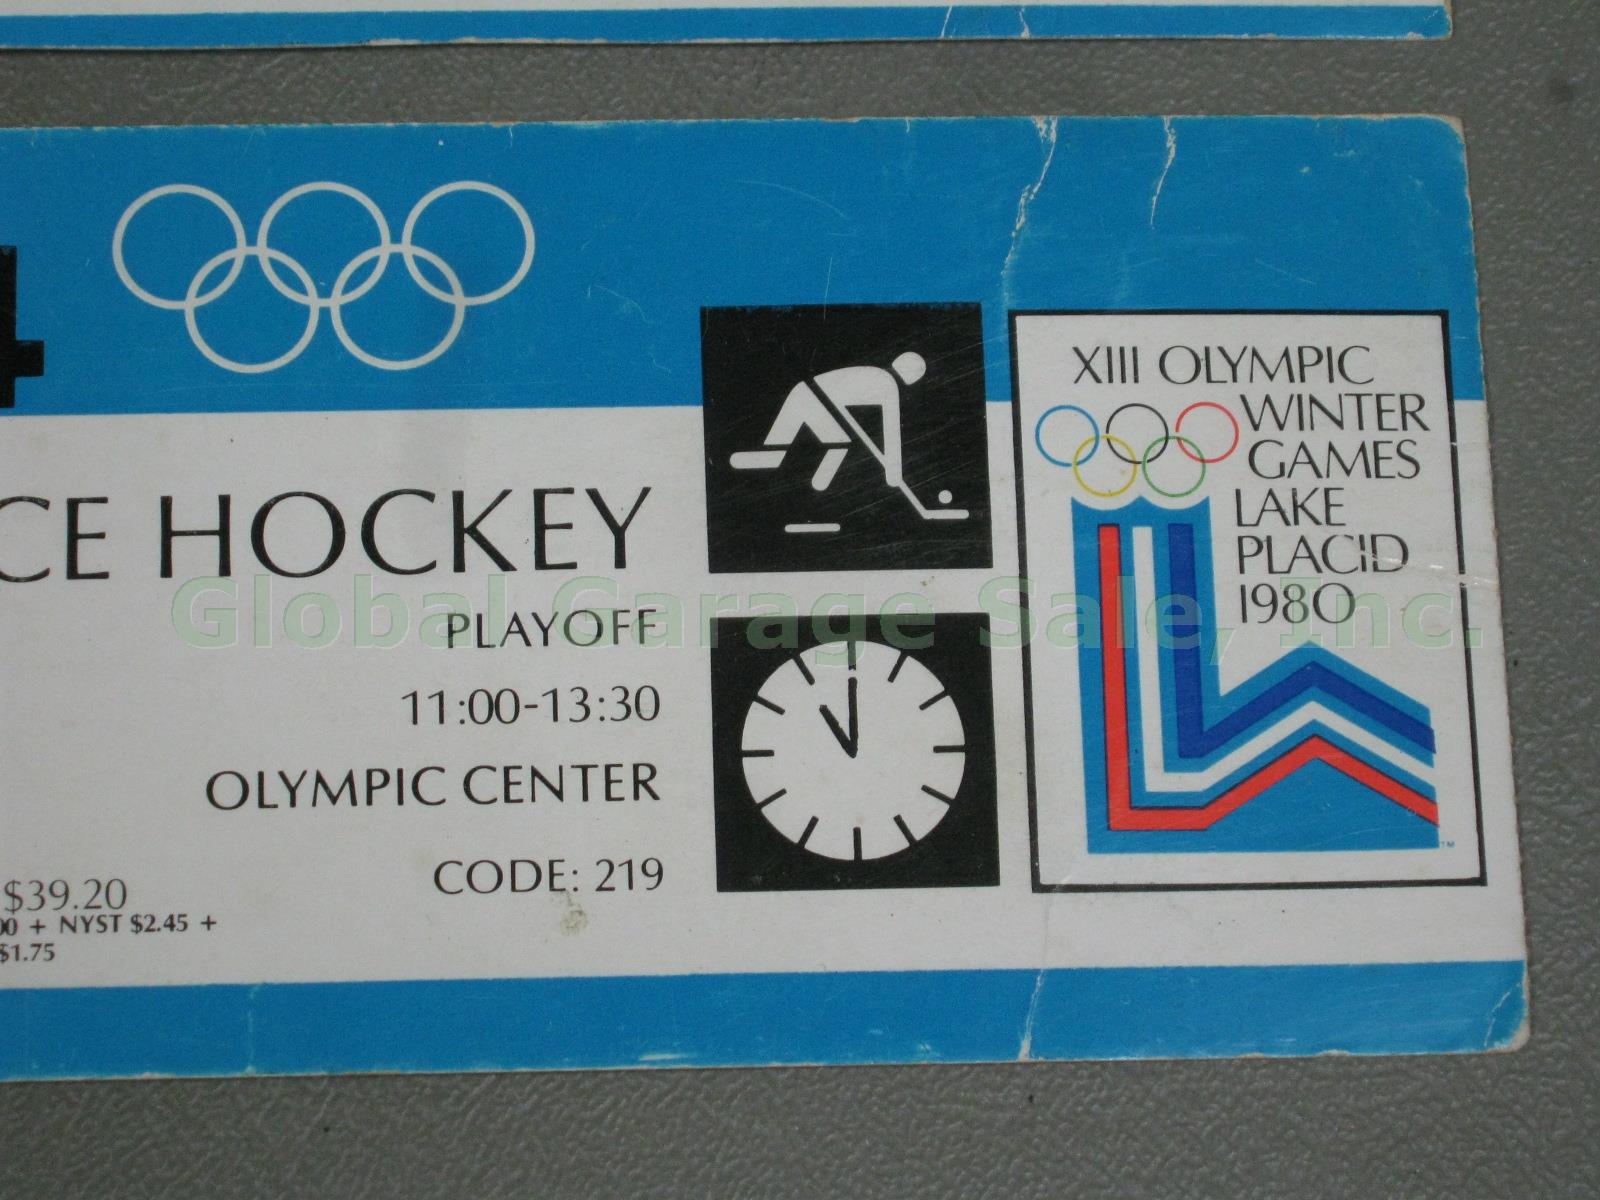 2 Original Tickets 1980 Lake Placid Olympic Games Gold Medal Ice Hockey Game NR! 2